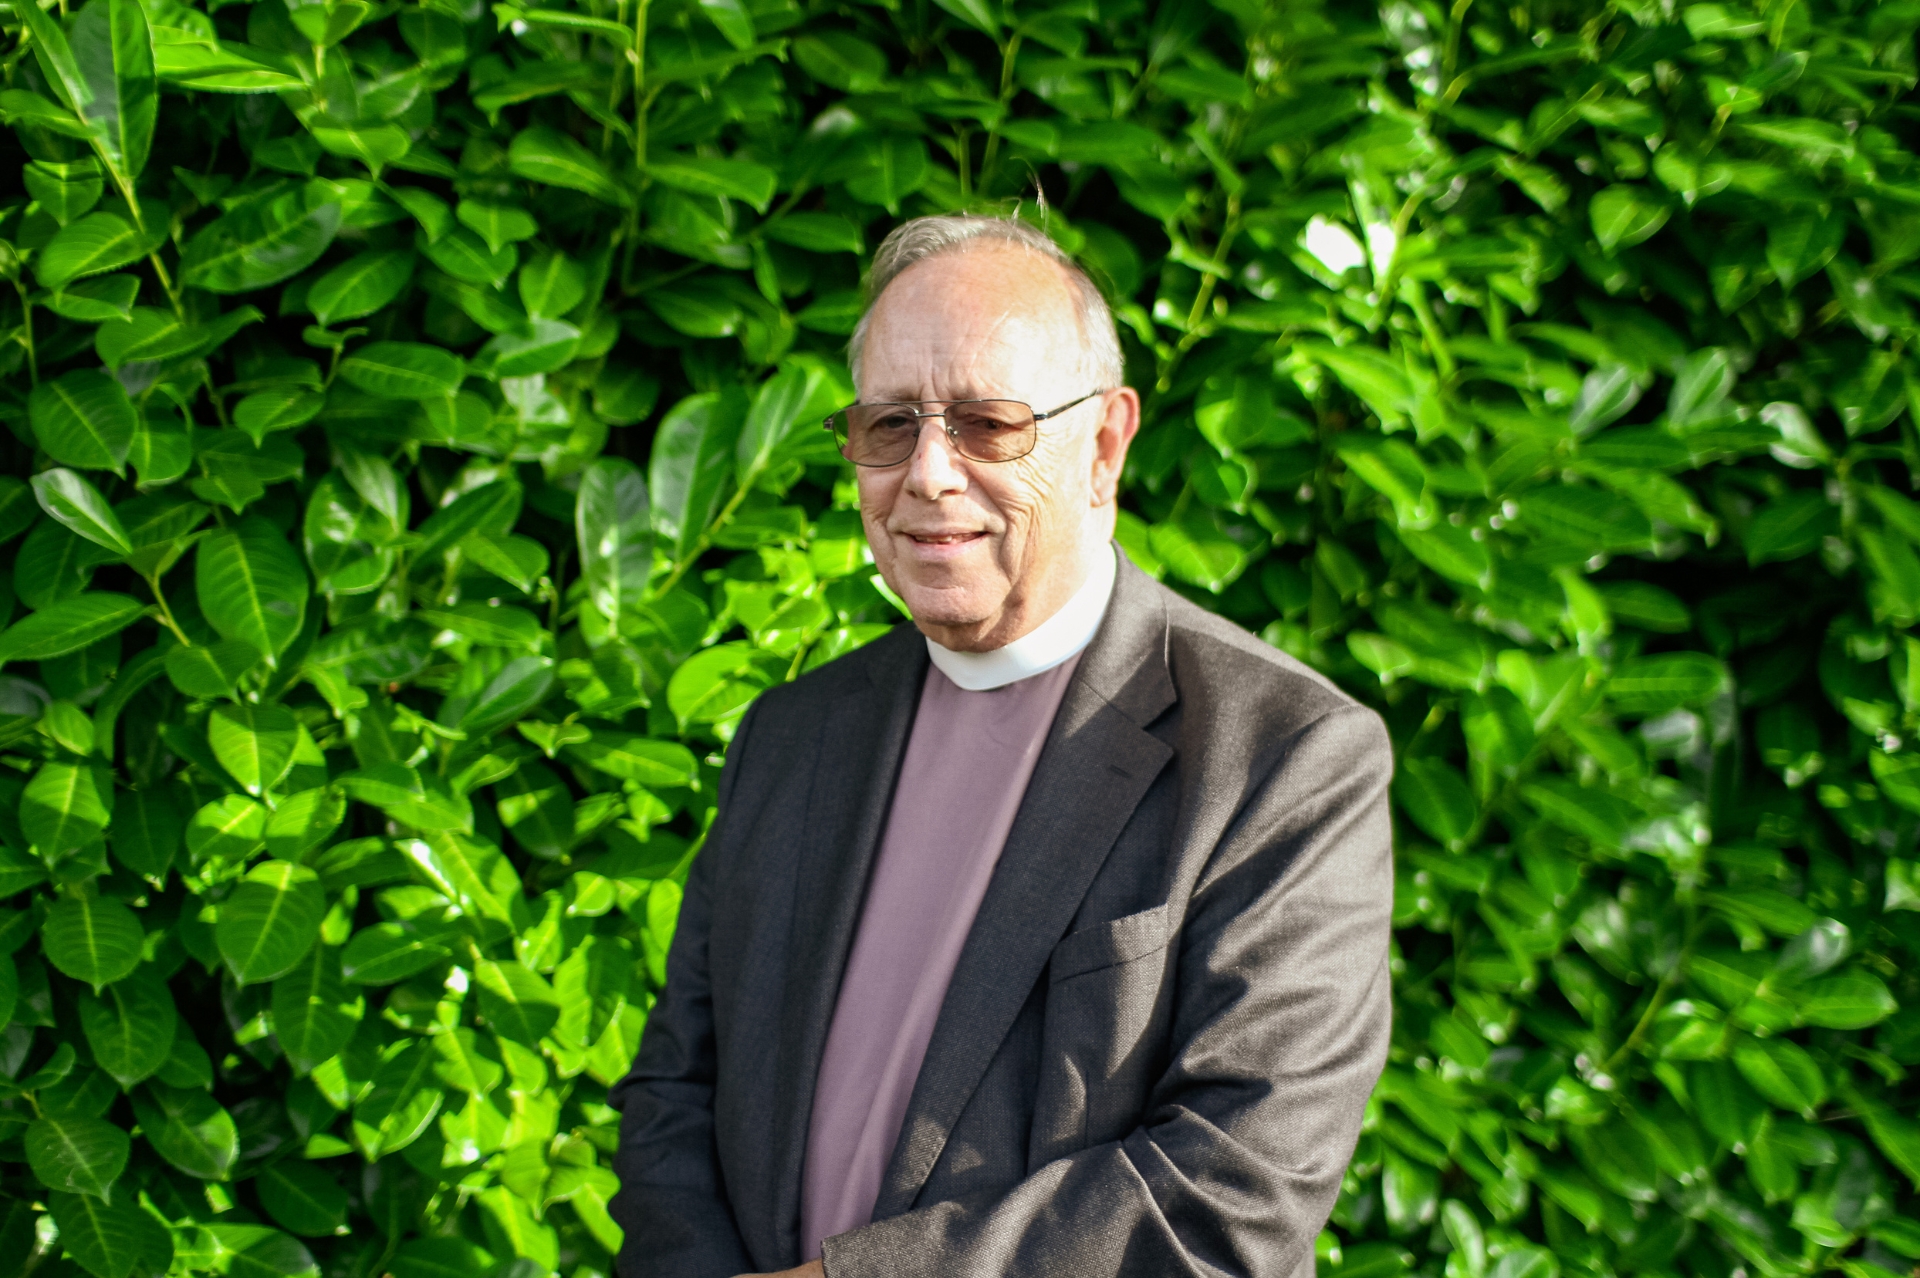 The Venerable Stuart Beake stood in front of a green hedge wearing a pastel purple clerical shirt and grey jacket